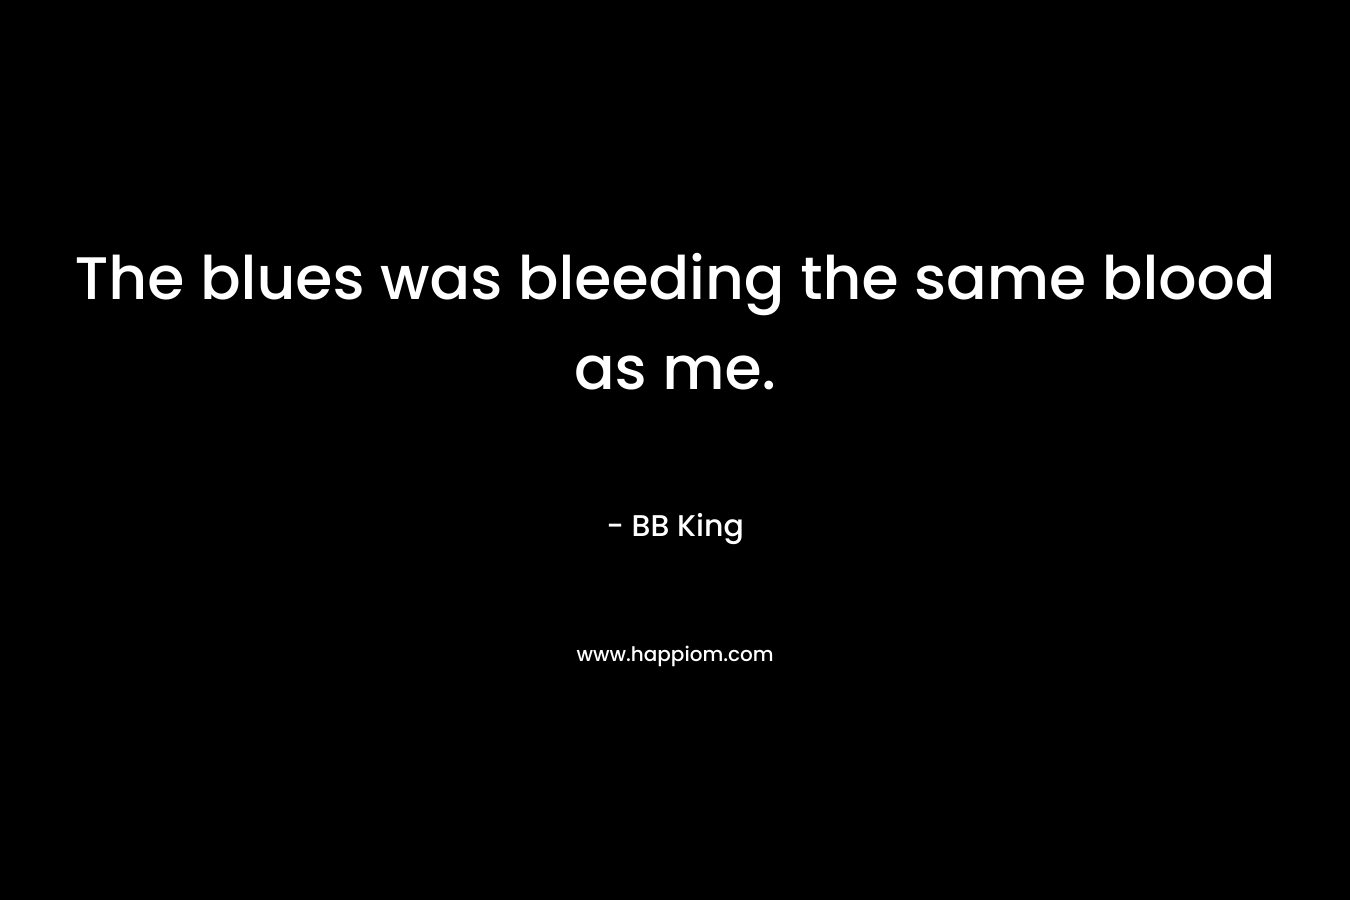 The blues was bleeding the same blood as me.